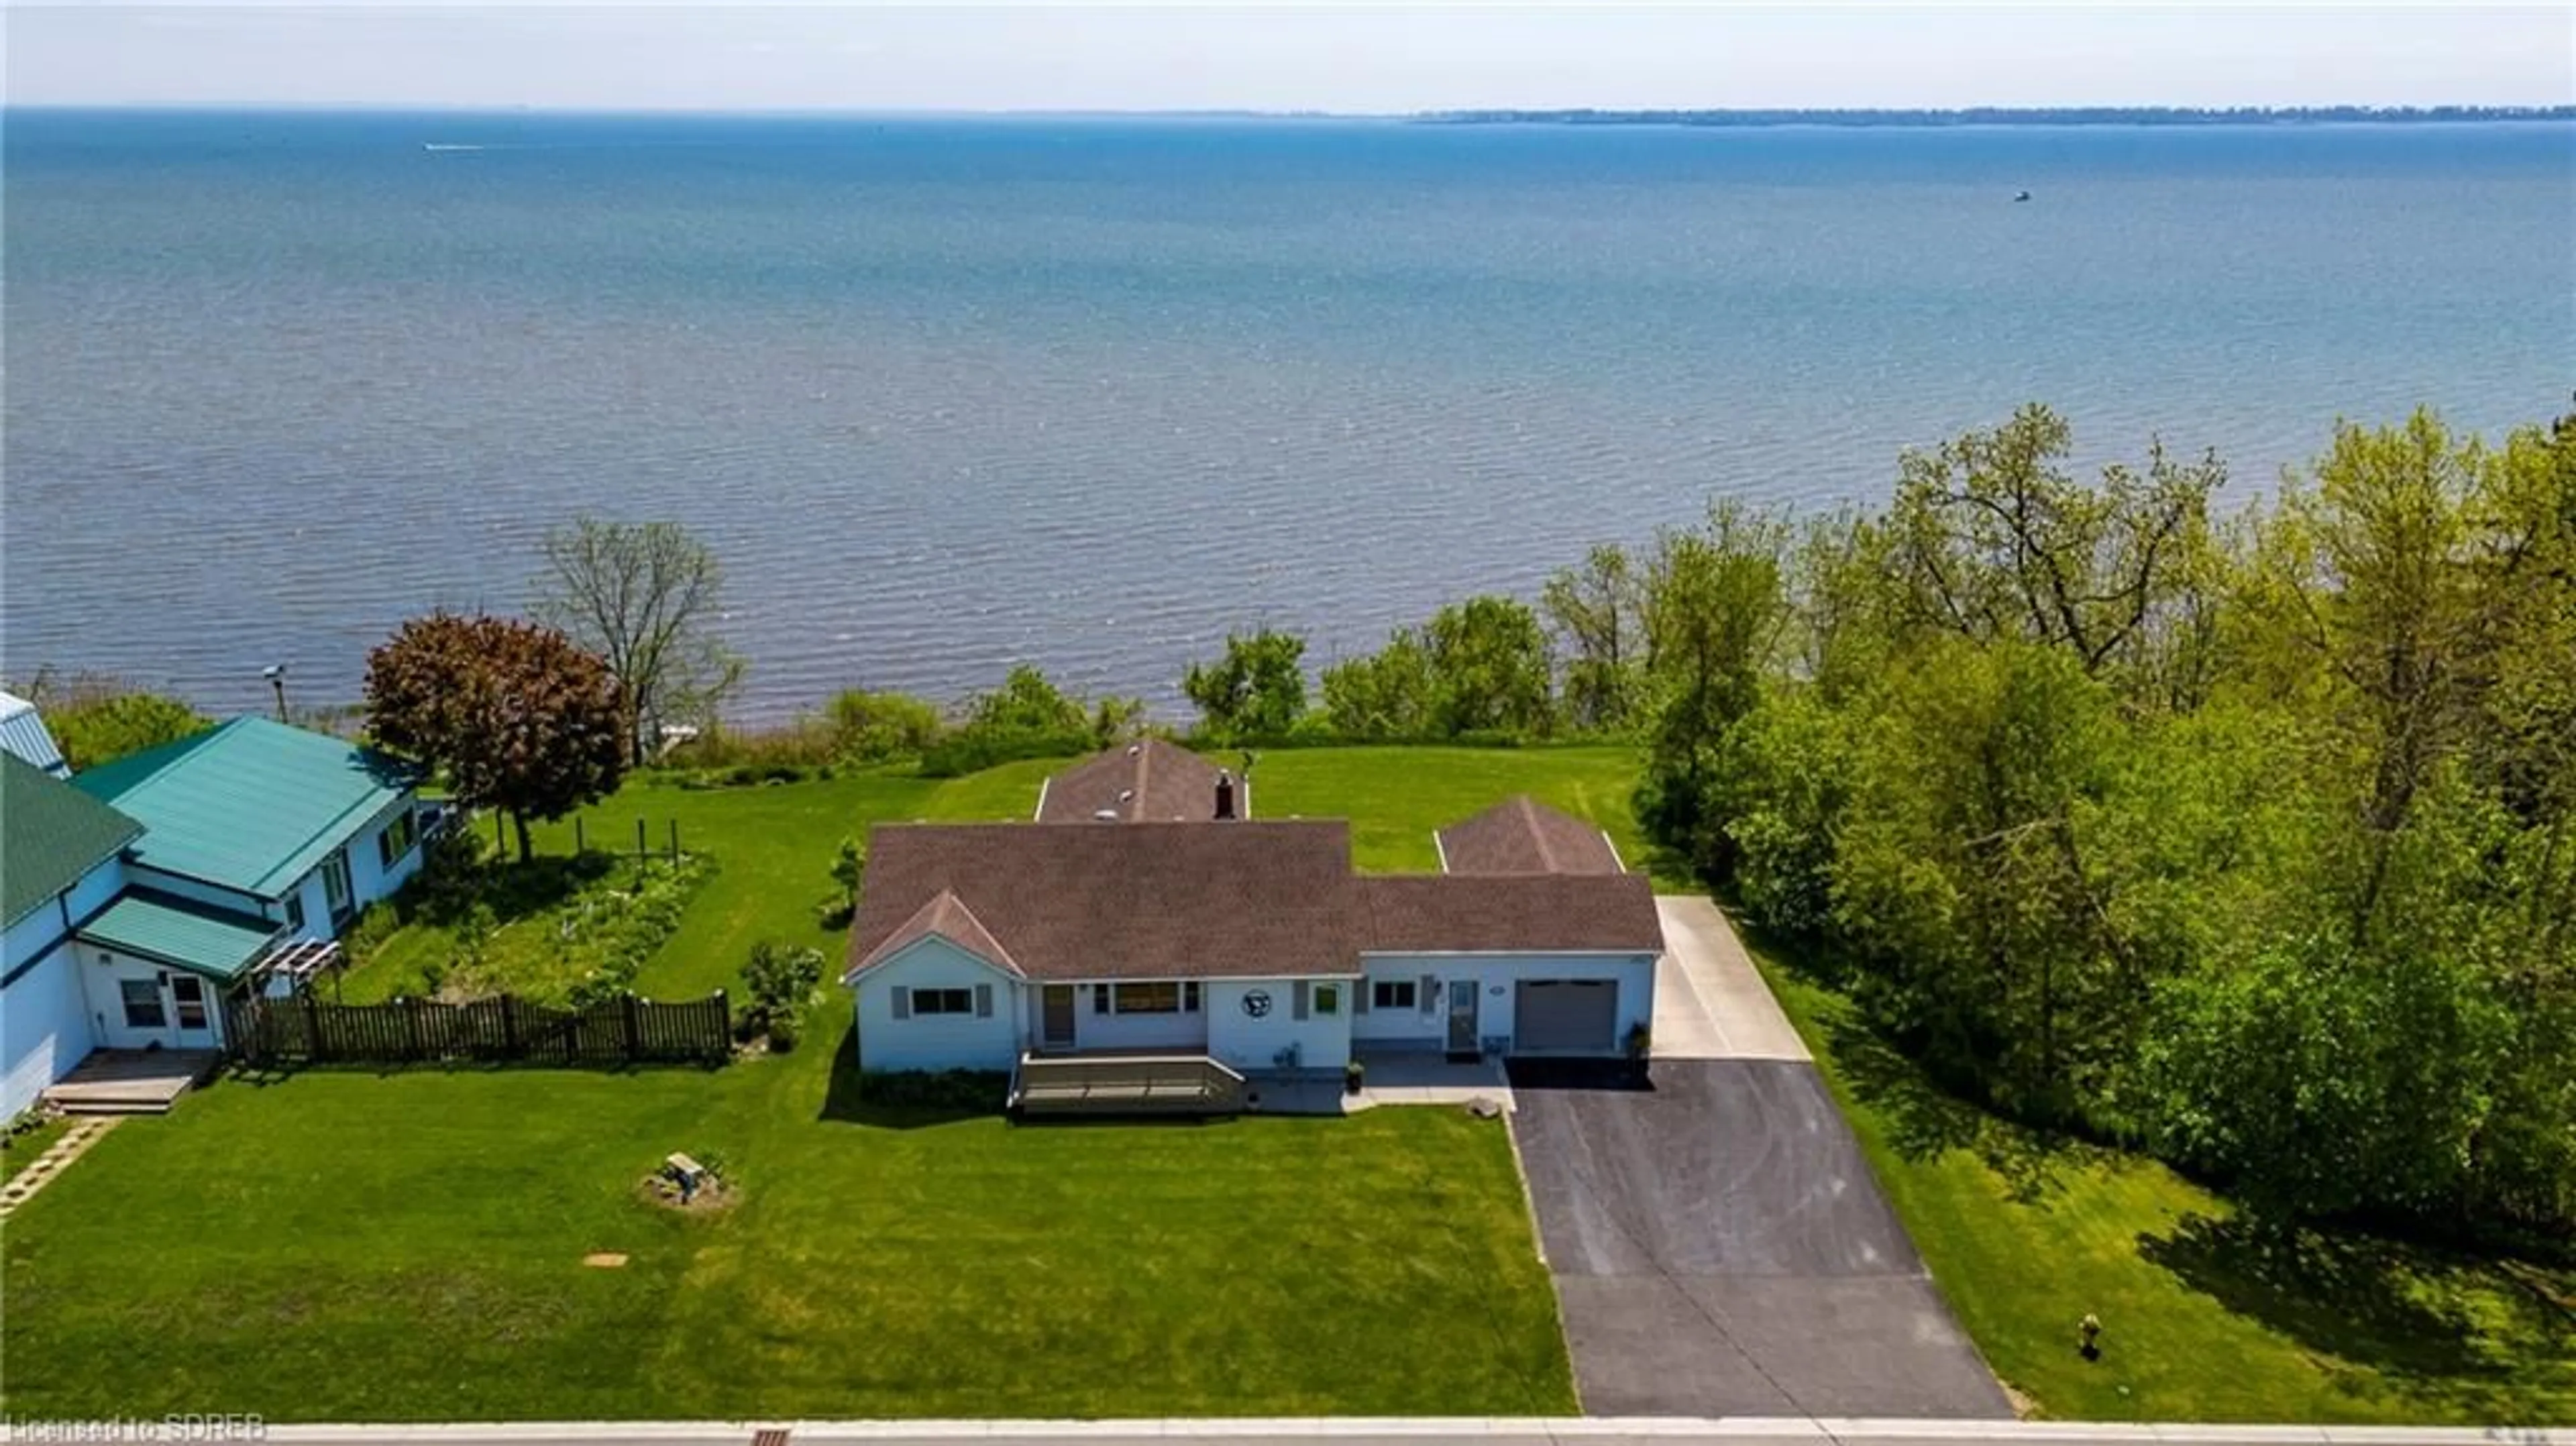 Lakeview for 42 Wolven St, Port Rowan Ontario N0E 1M0